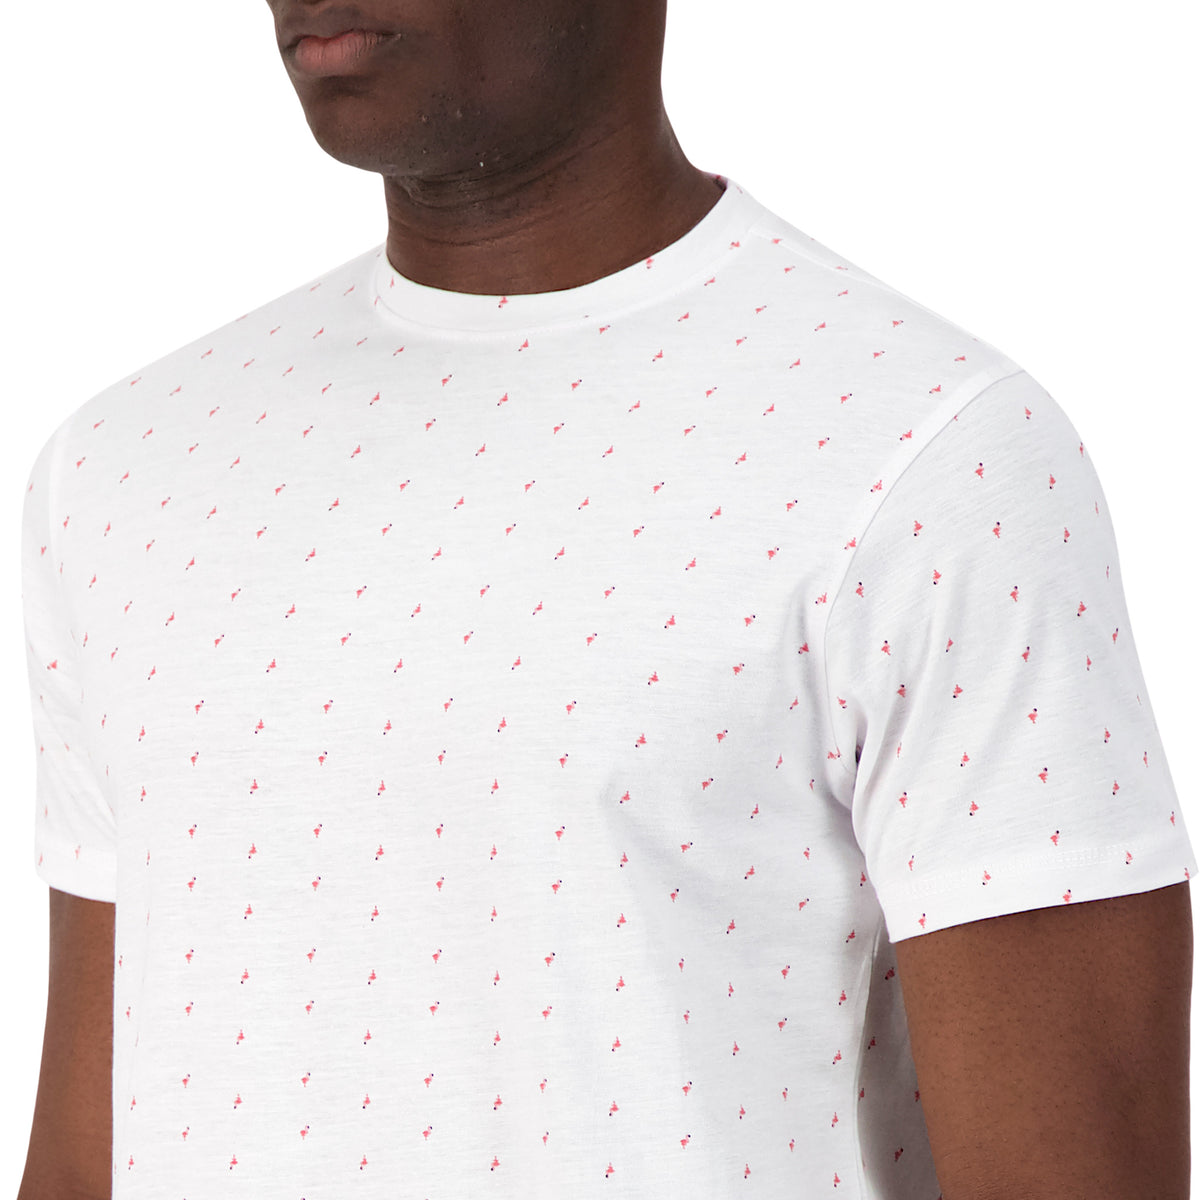 Model Front Close Up View of Short Sleeve Shirt with Flamingo Print in White